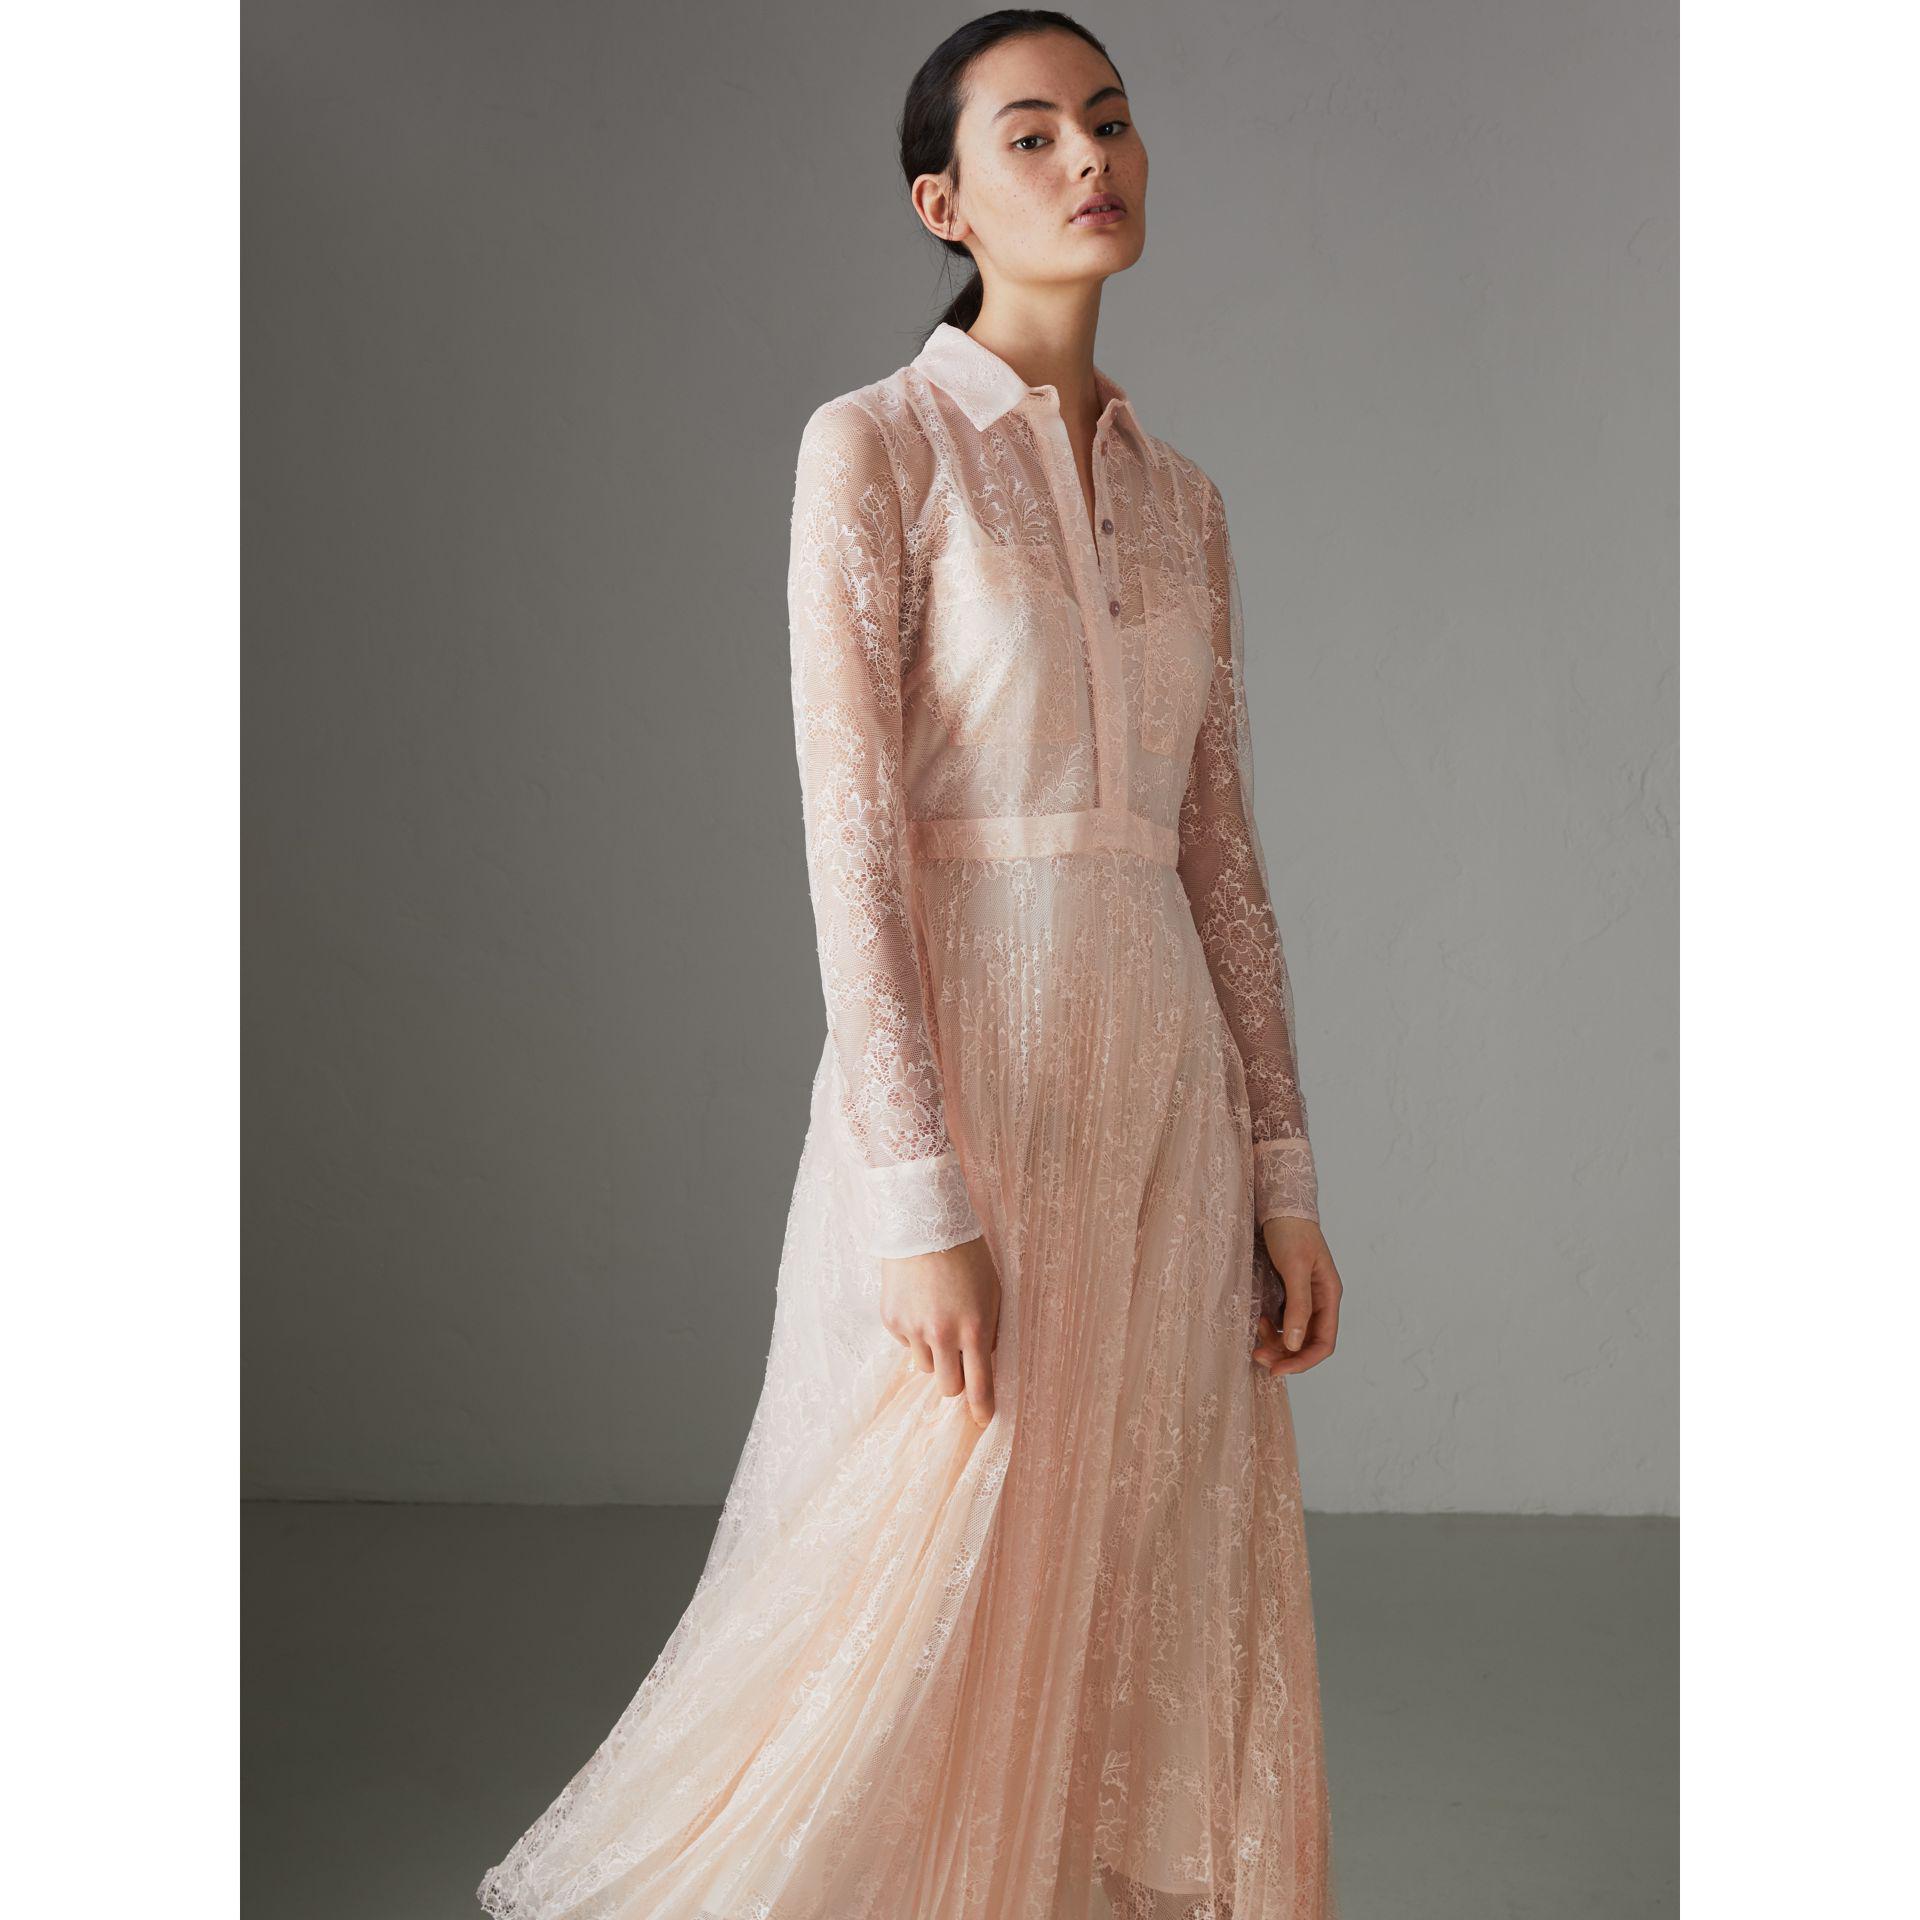 Burberry Pleated Lace Dress in Pink | Lyst